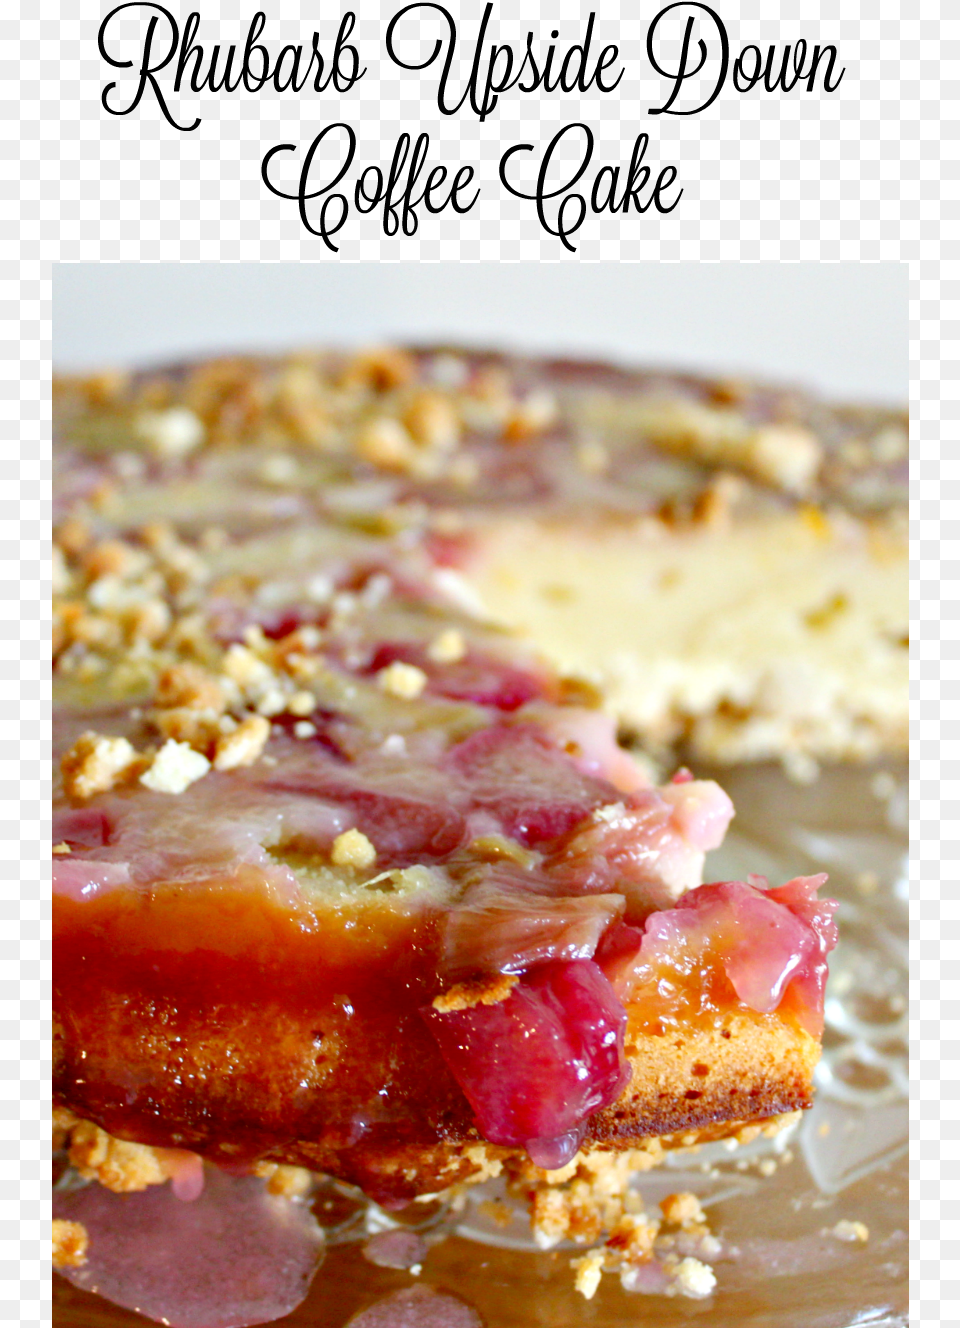 Rhubarb Upside Down Coffee Cake Cocktail, Food, Pizza, Bread, Dessert Png Image